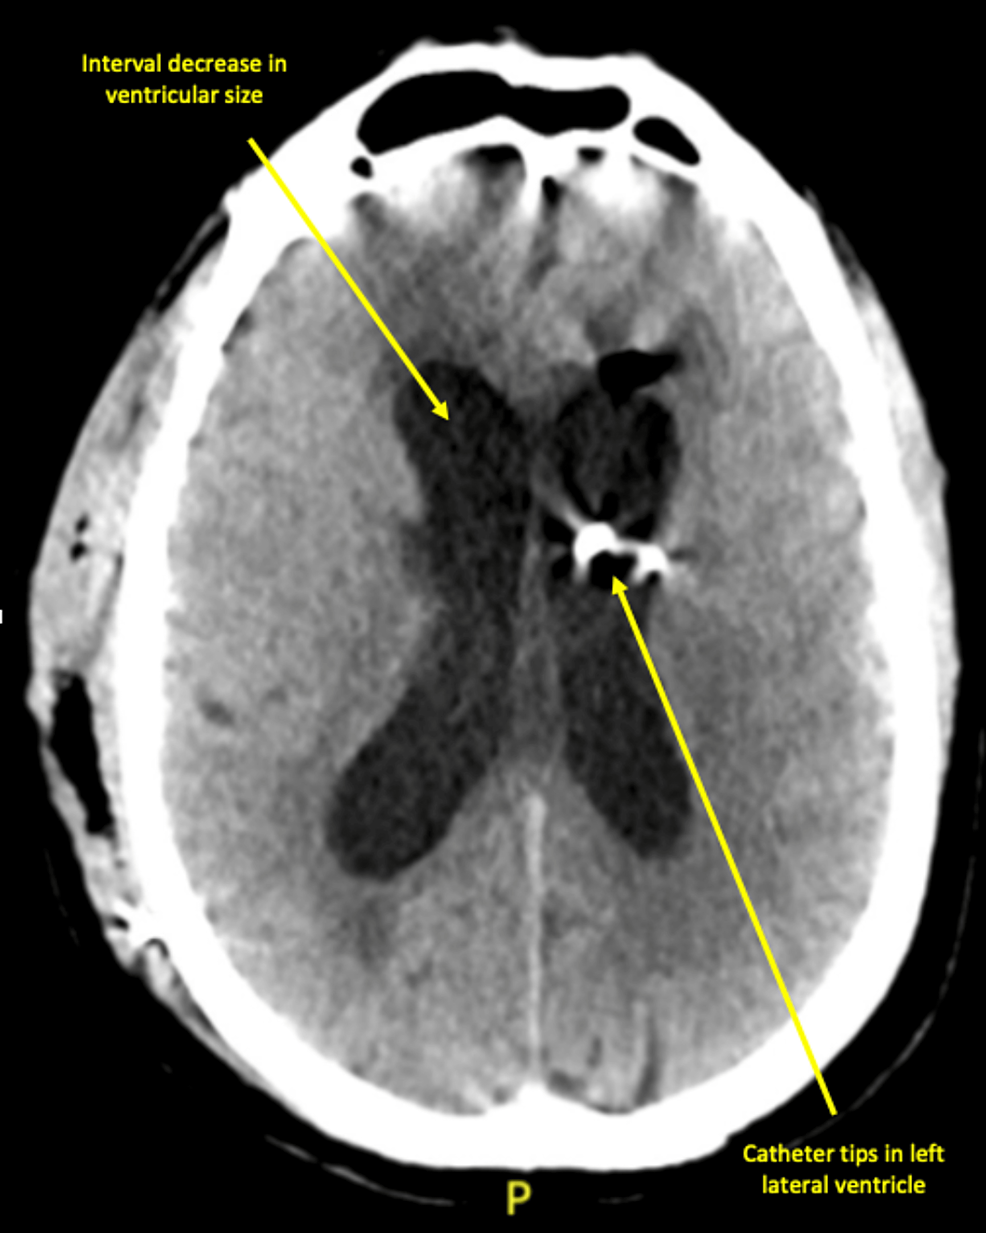 CT-head-without-contrast-on-day-19-of-admission-revealed-an-interval-decrease-in-ventricular-size-and-catheter-tips-in-the-left-lateral-ventricle.